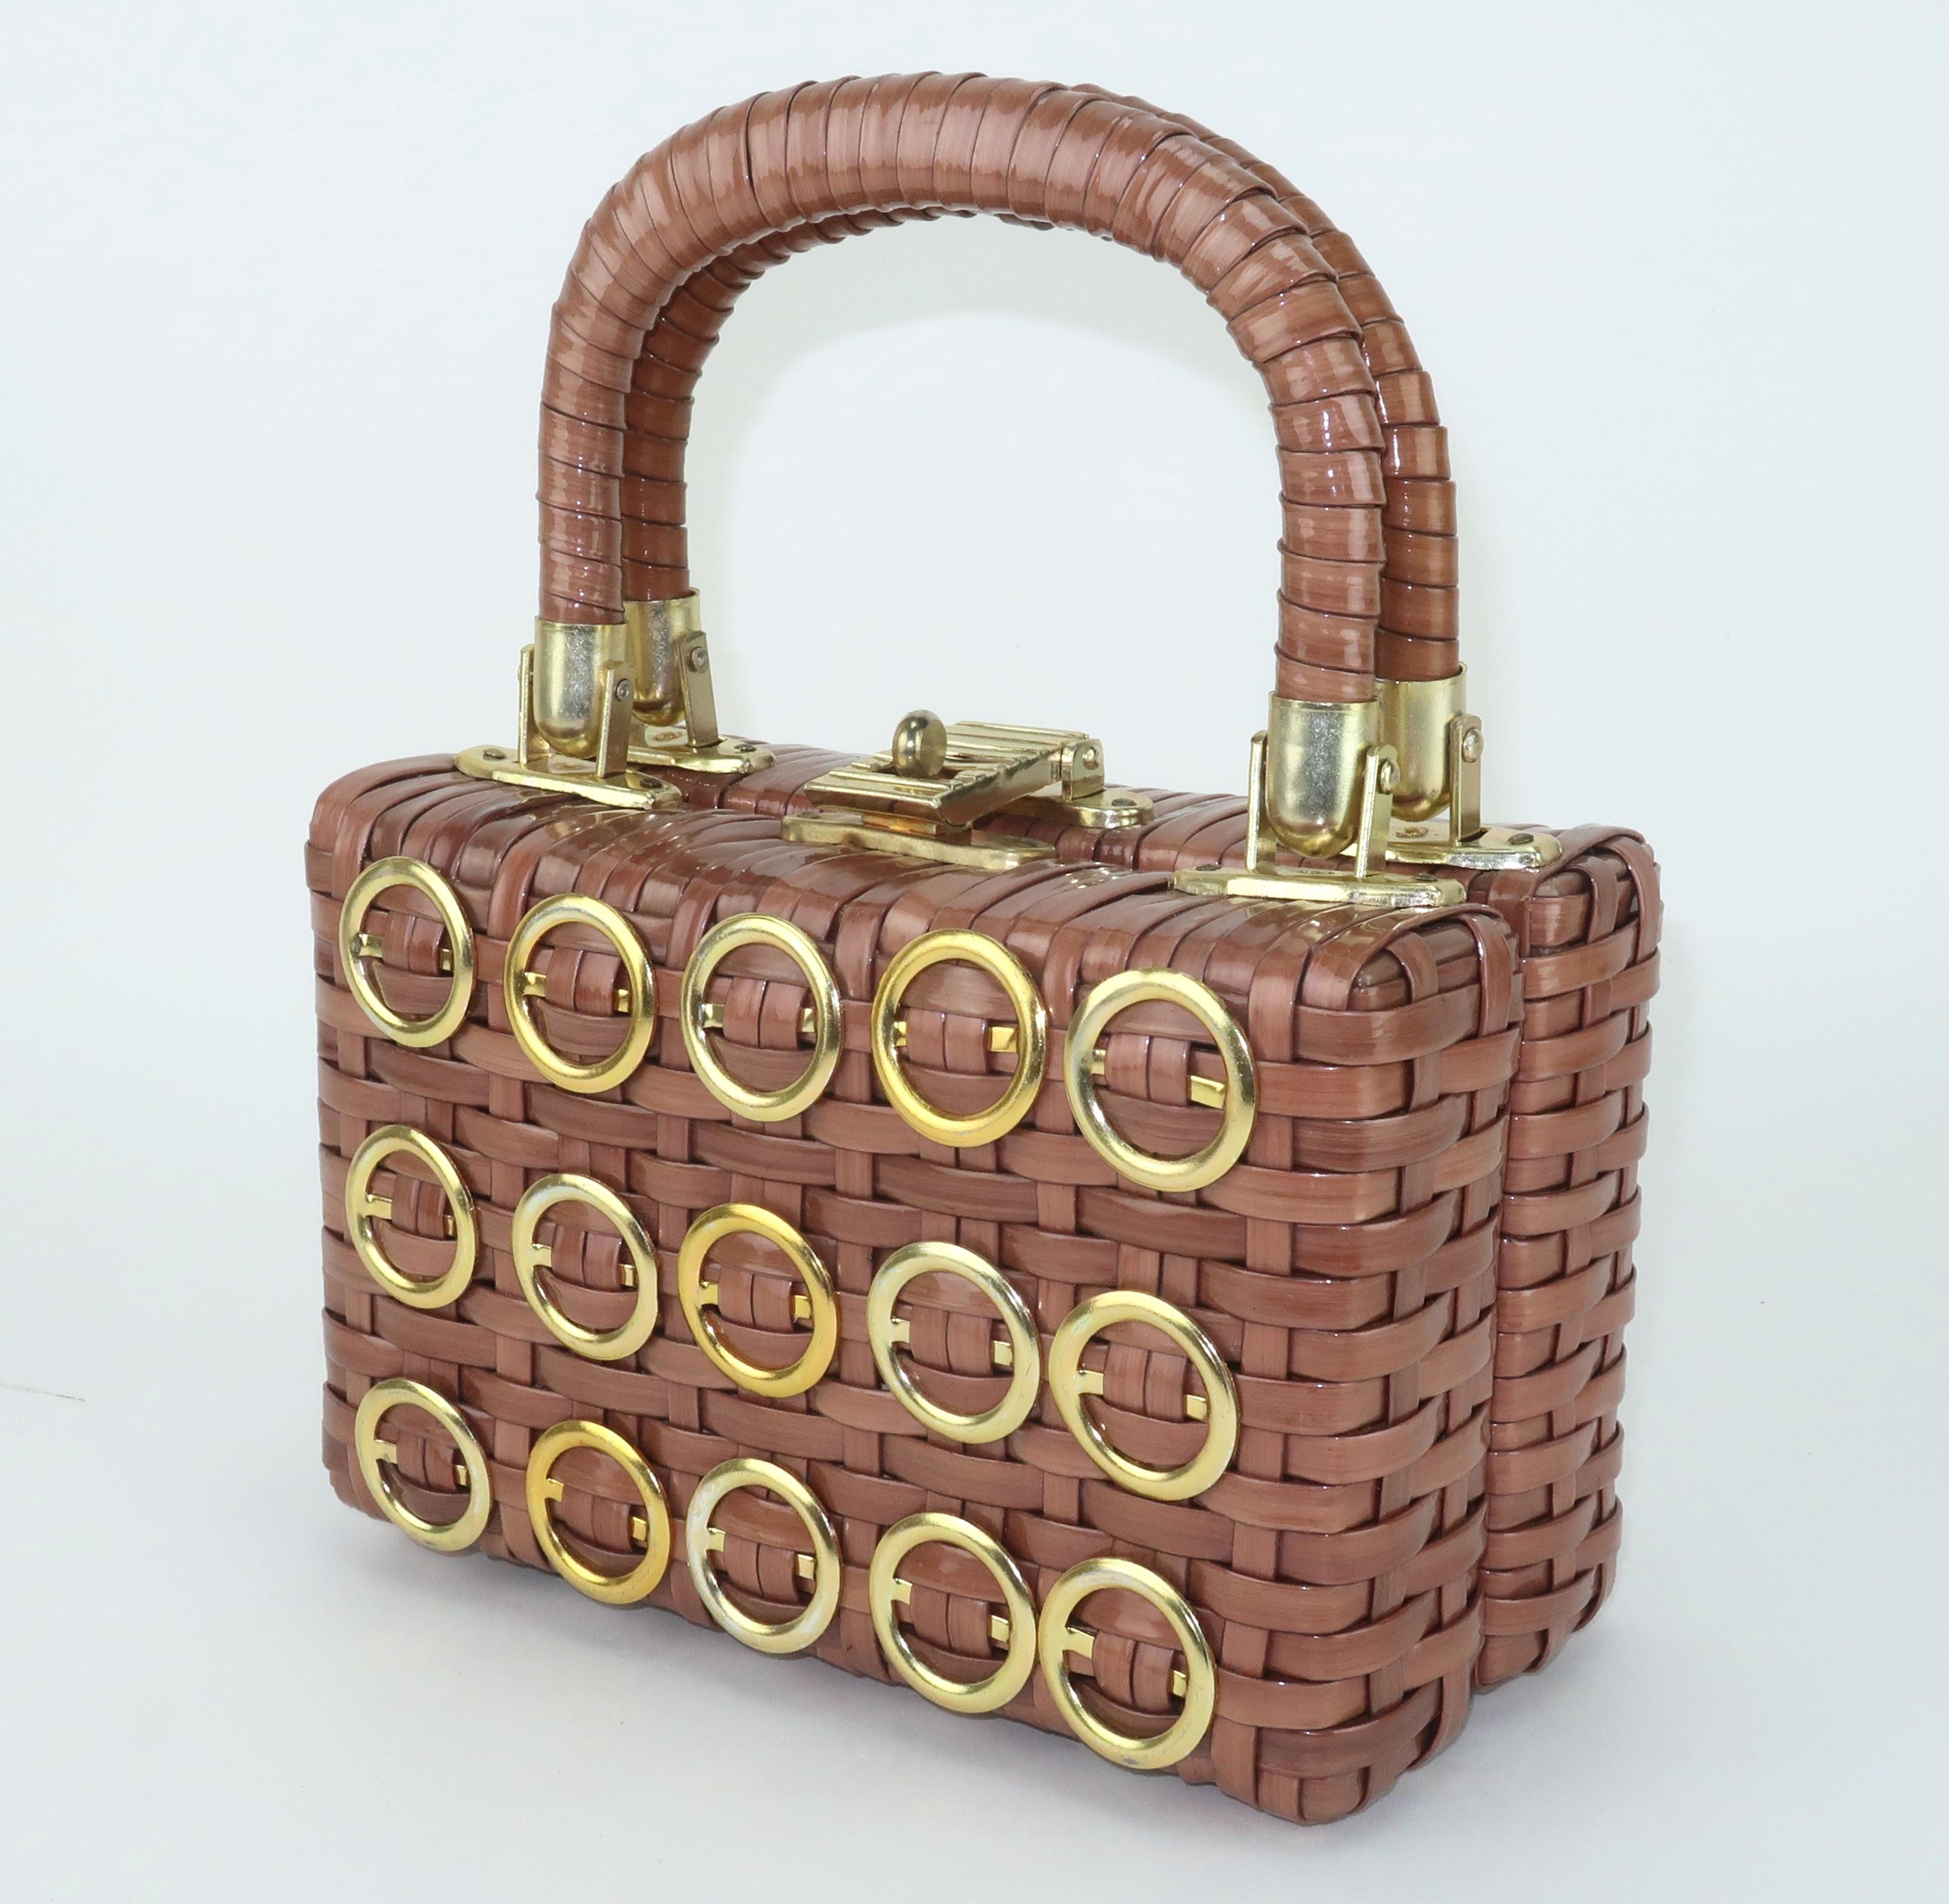 Mod 1960's coated straw wooden box handbag with top handles and gold tone metal ring accents.  The kisslock closure opens to reveal a vinyl lined interior with a zippered side pocket.  The base features nail head feet and leather hinges.  It is a